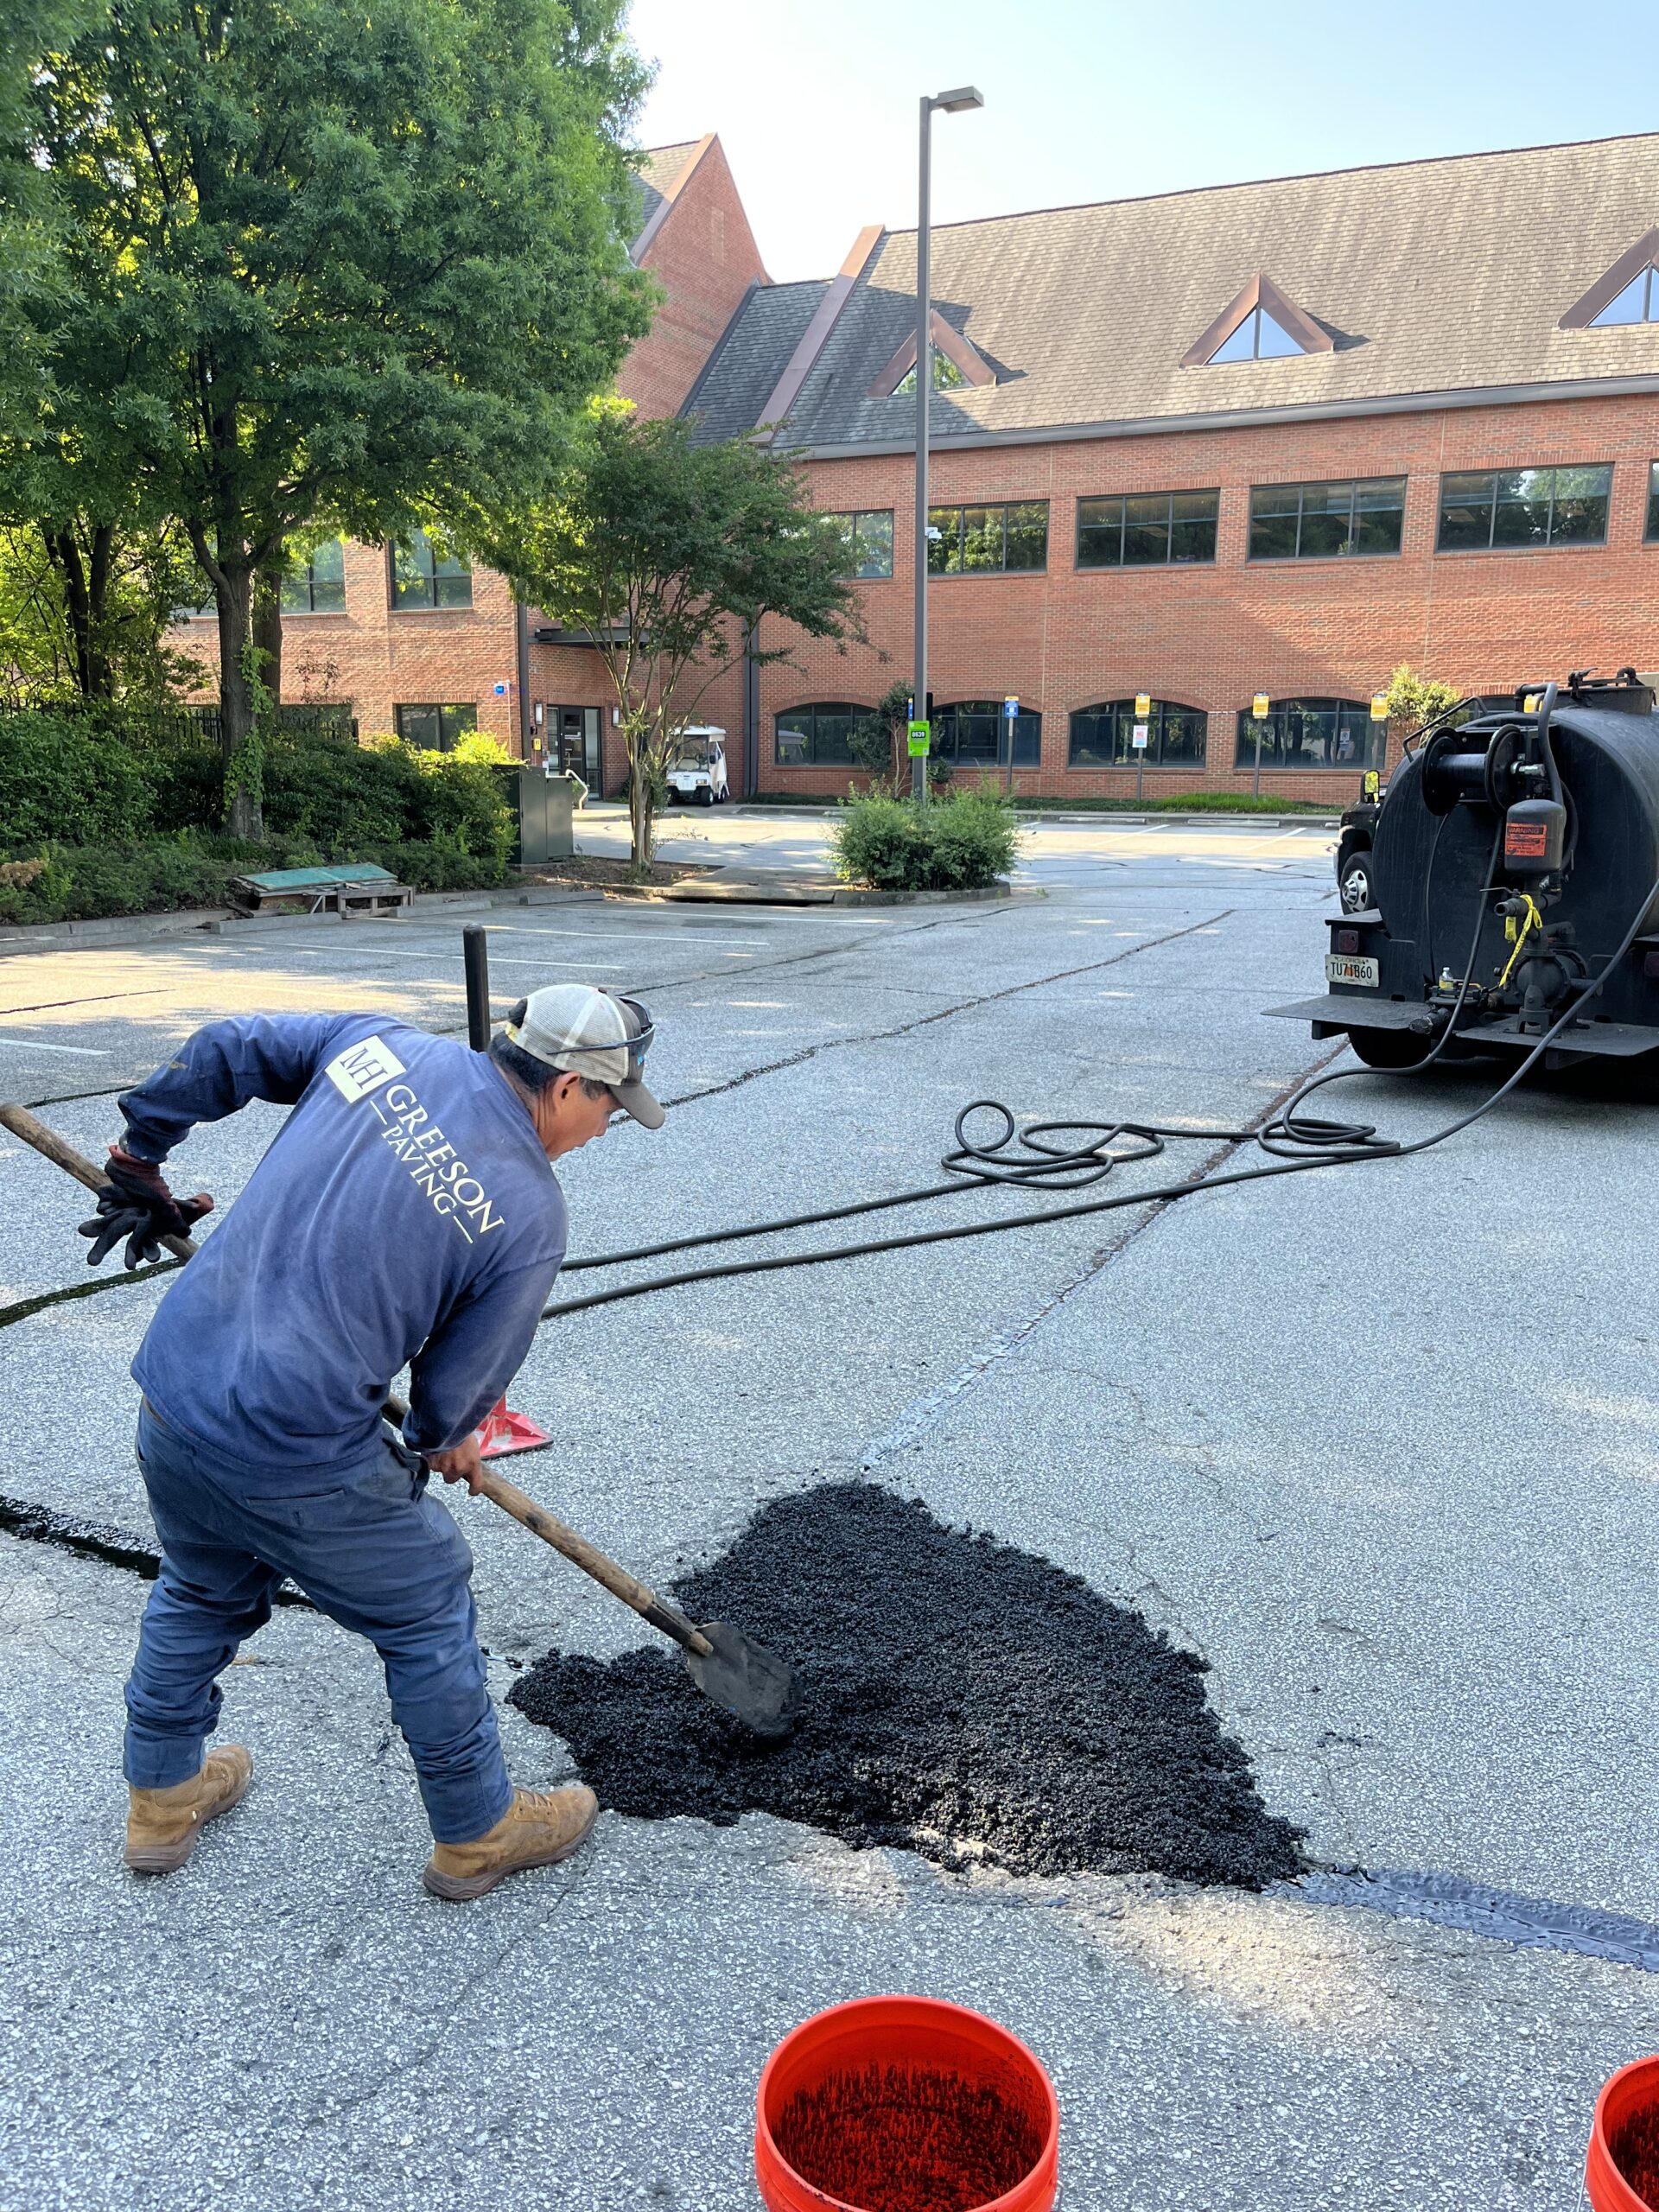 What Is The Best Way To Repair Damaged Asphalt?